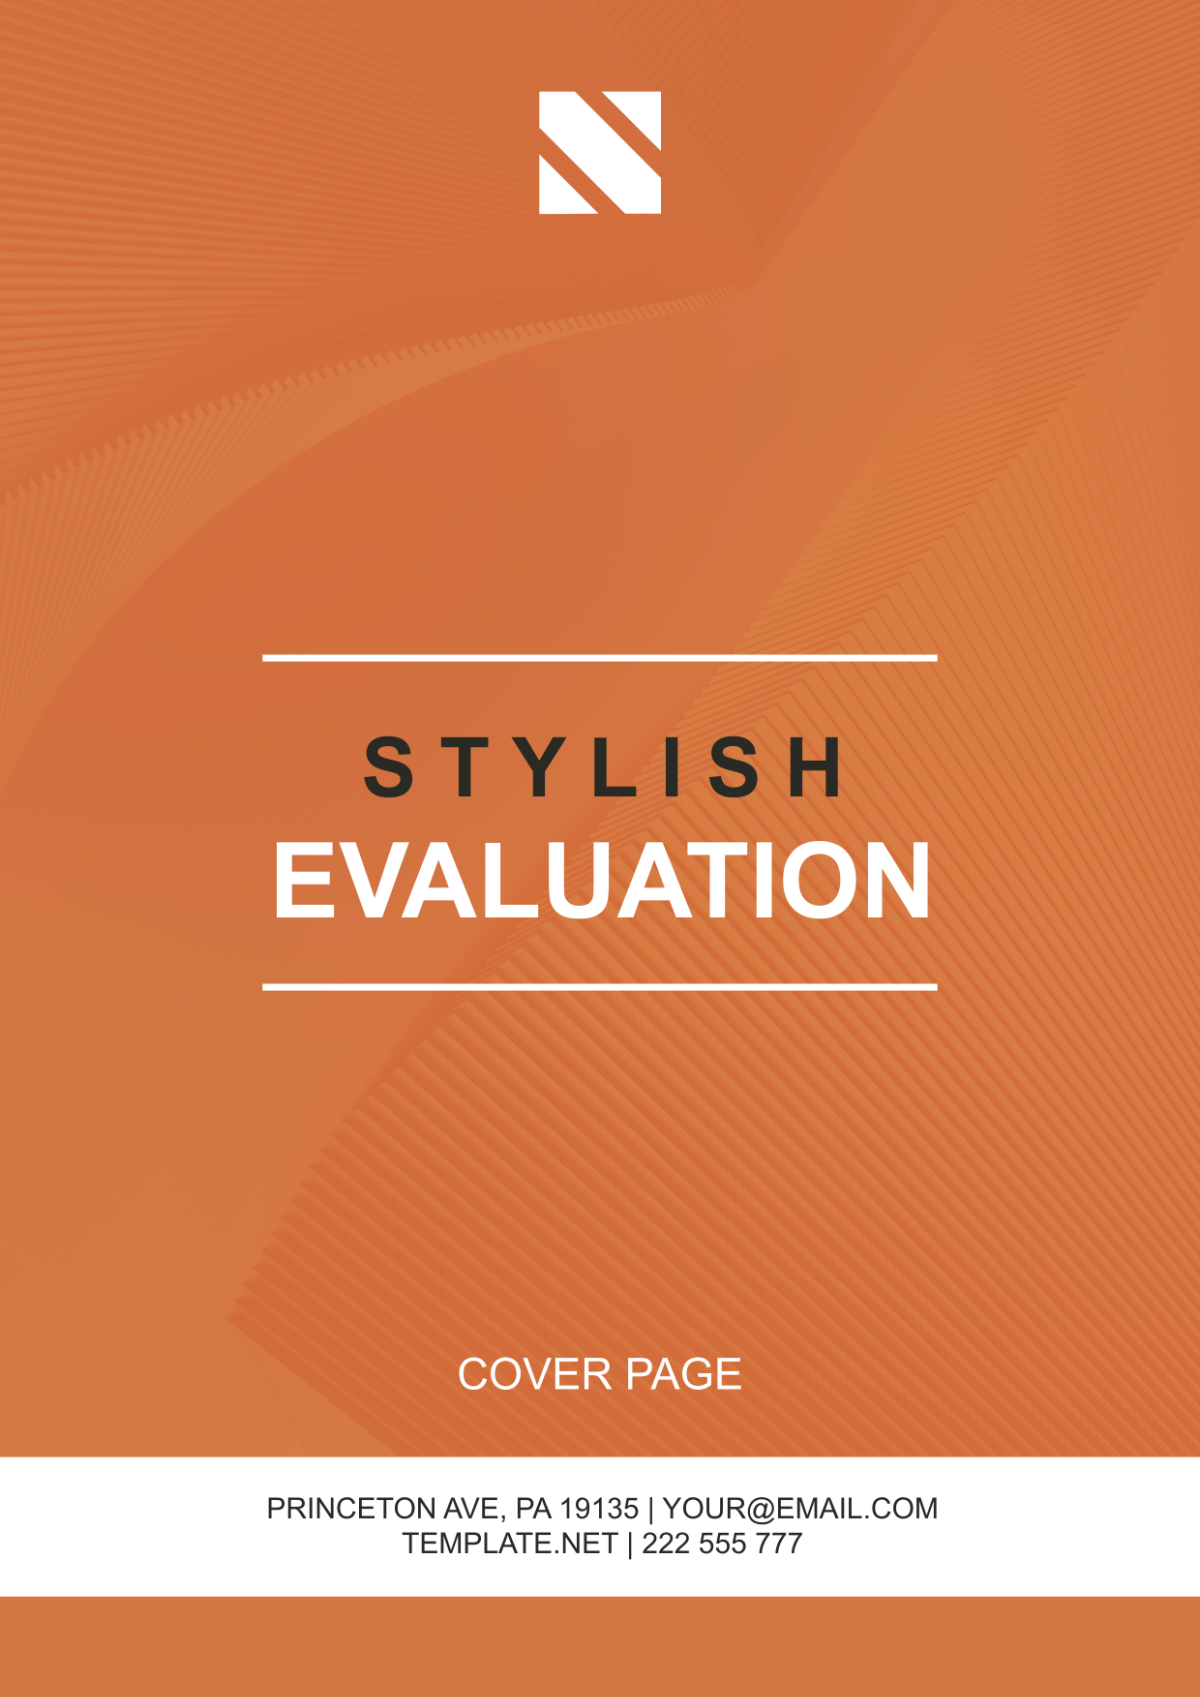 Stylish Evaluation Cover Page Template